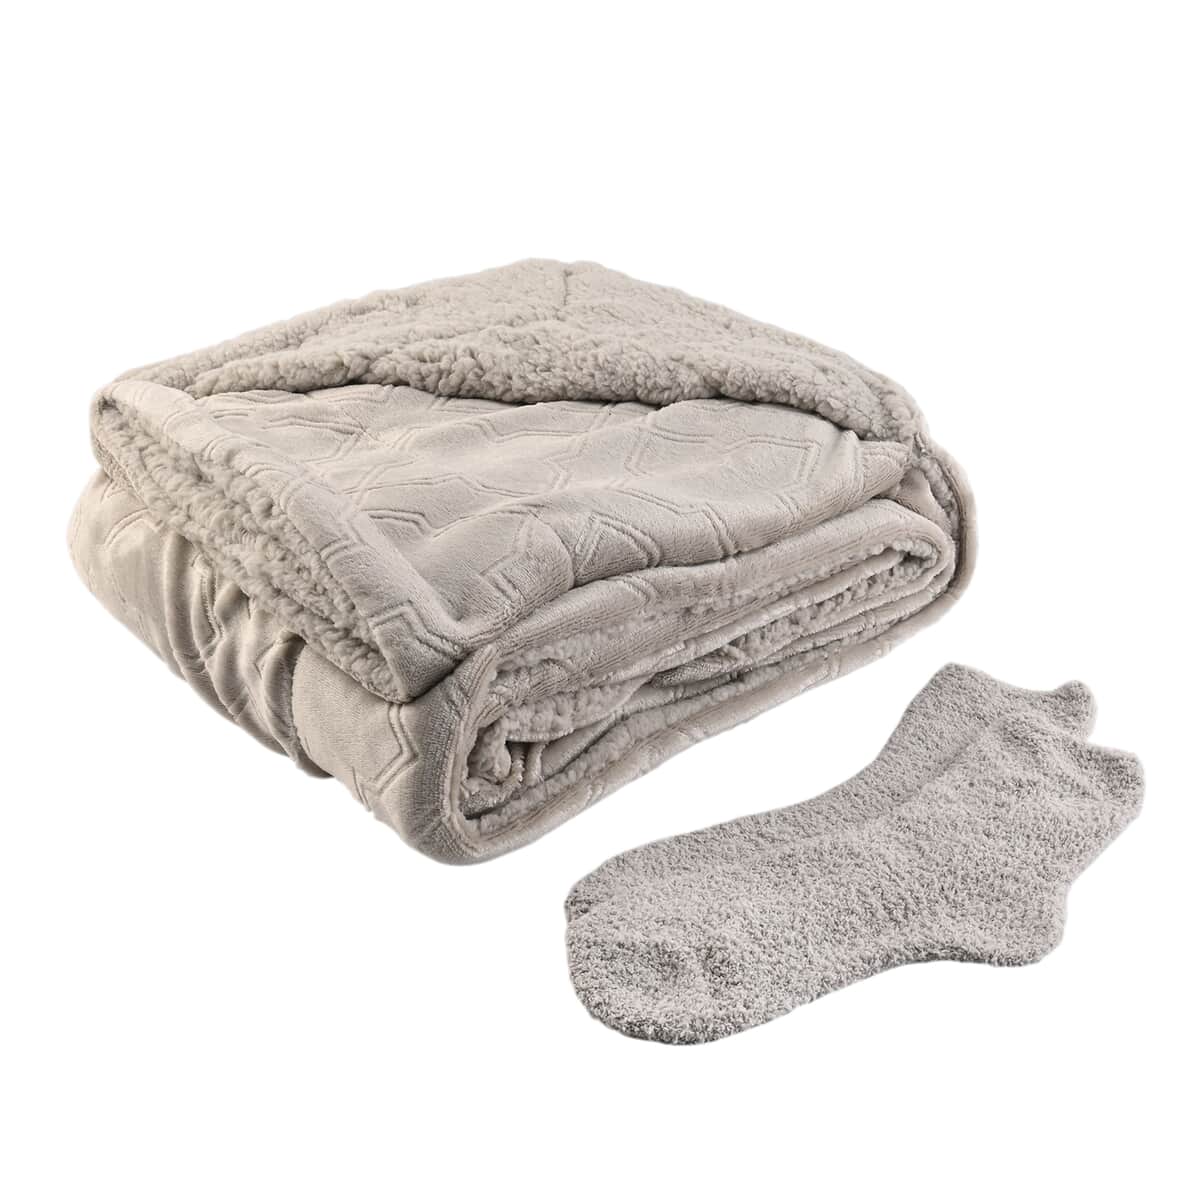 ARDOUR 2pc Gift Set Beige Sherpa Throw with Bonus Socks Set (One Size Fits Most) image number 0